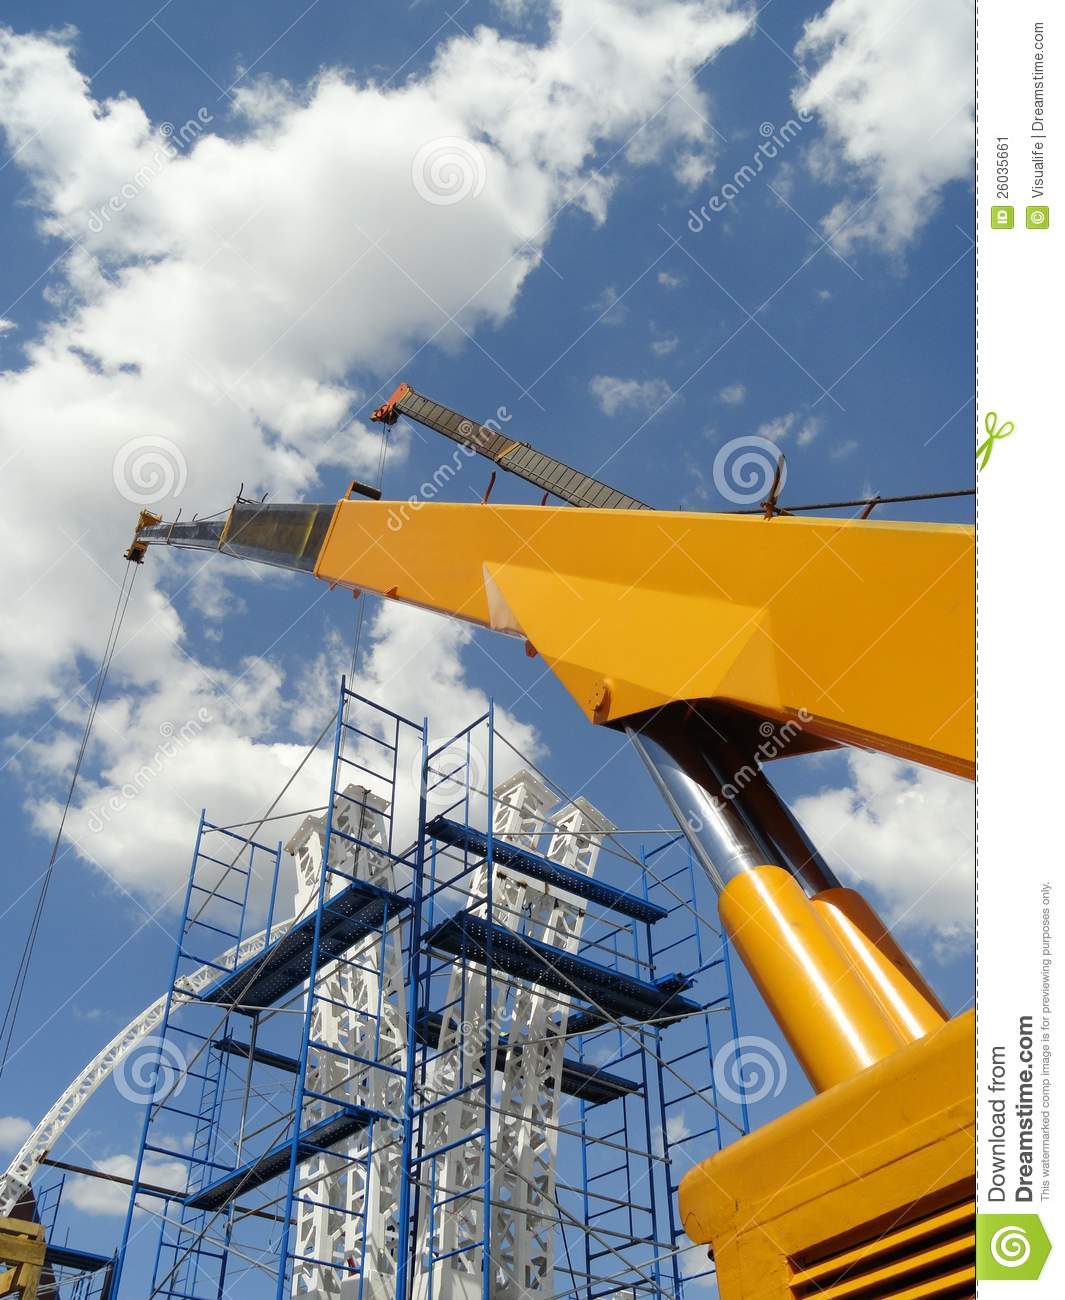 Yellow Boom Of An Hydraulic Crane Mounting A Metallic Structure